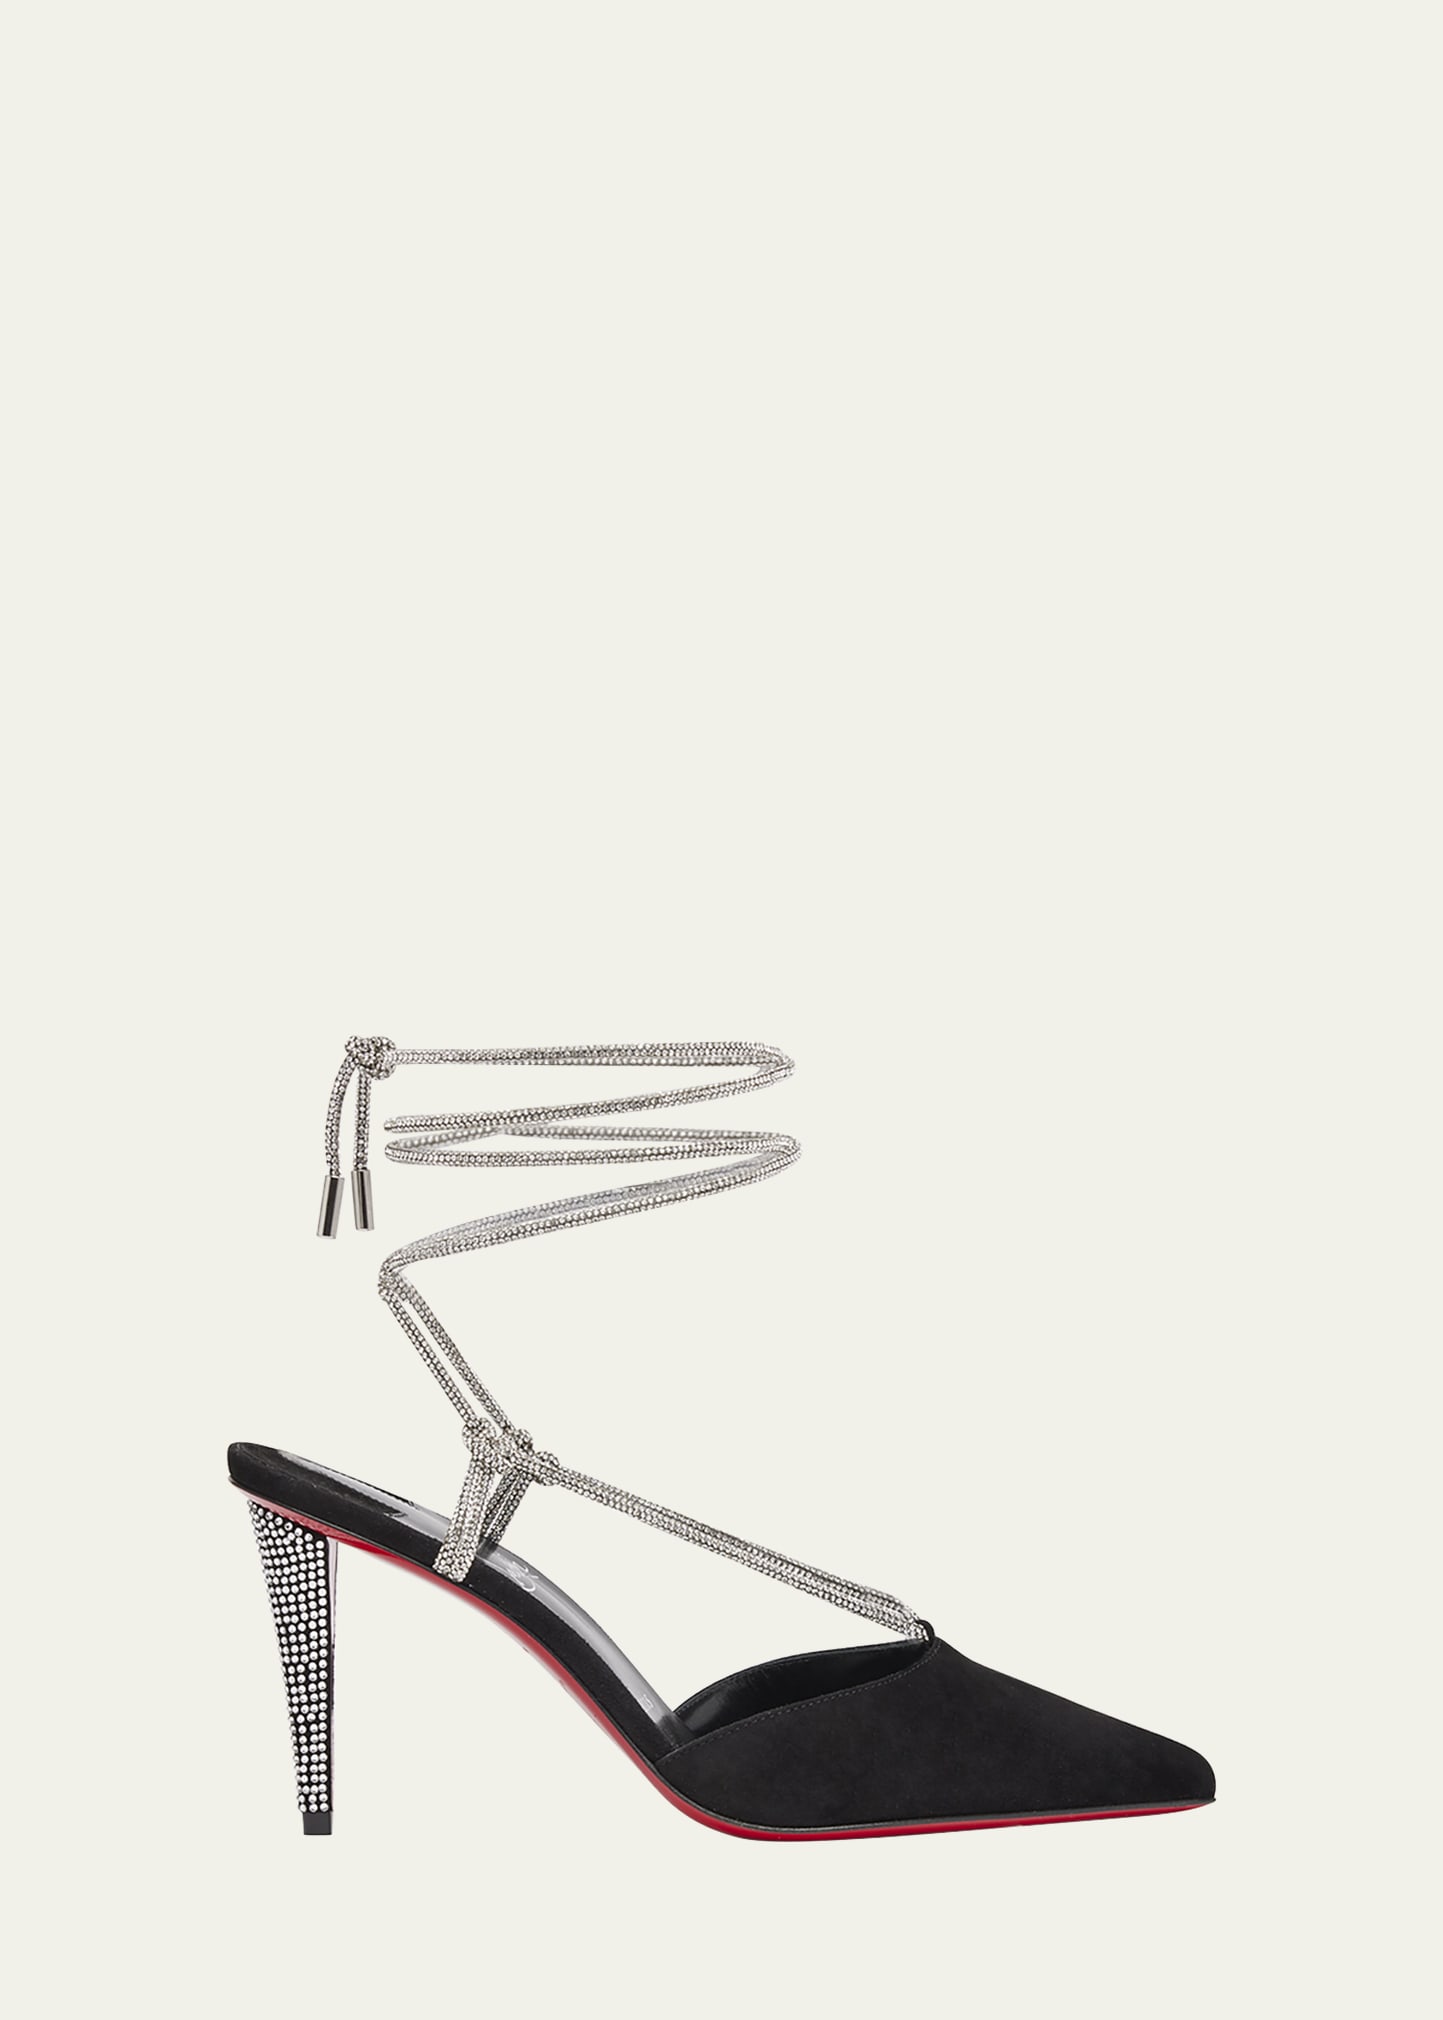 Christian Louboutin shoes prices